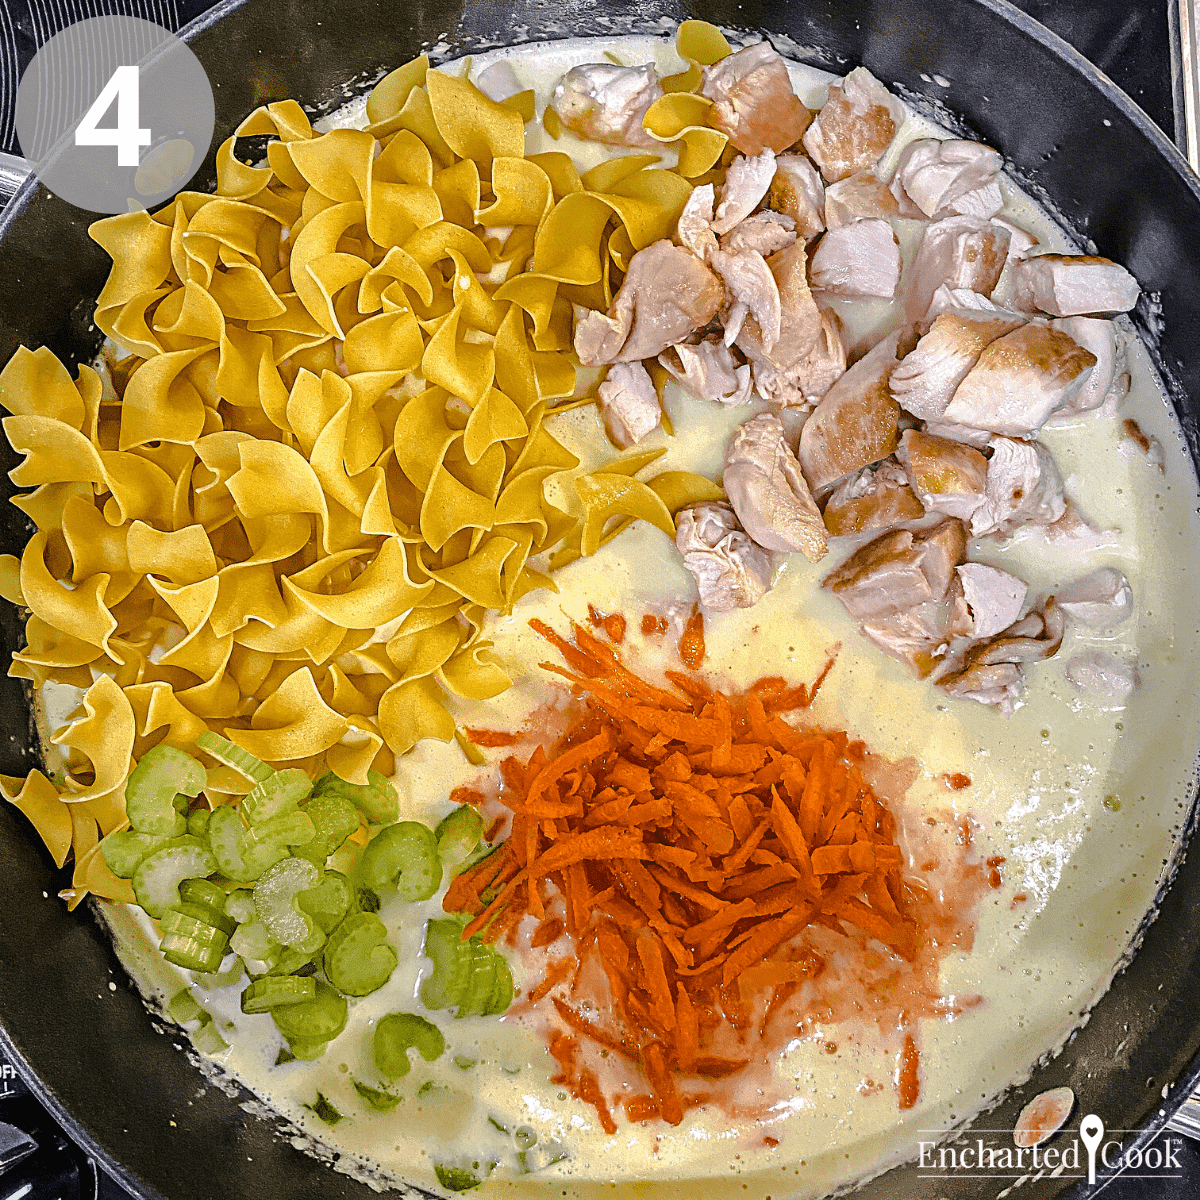 Adding the cut chicken, shredded carrots, celery, and egg noodles to the soup base.